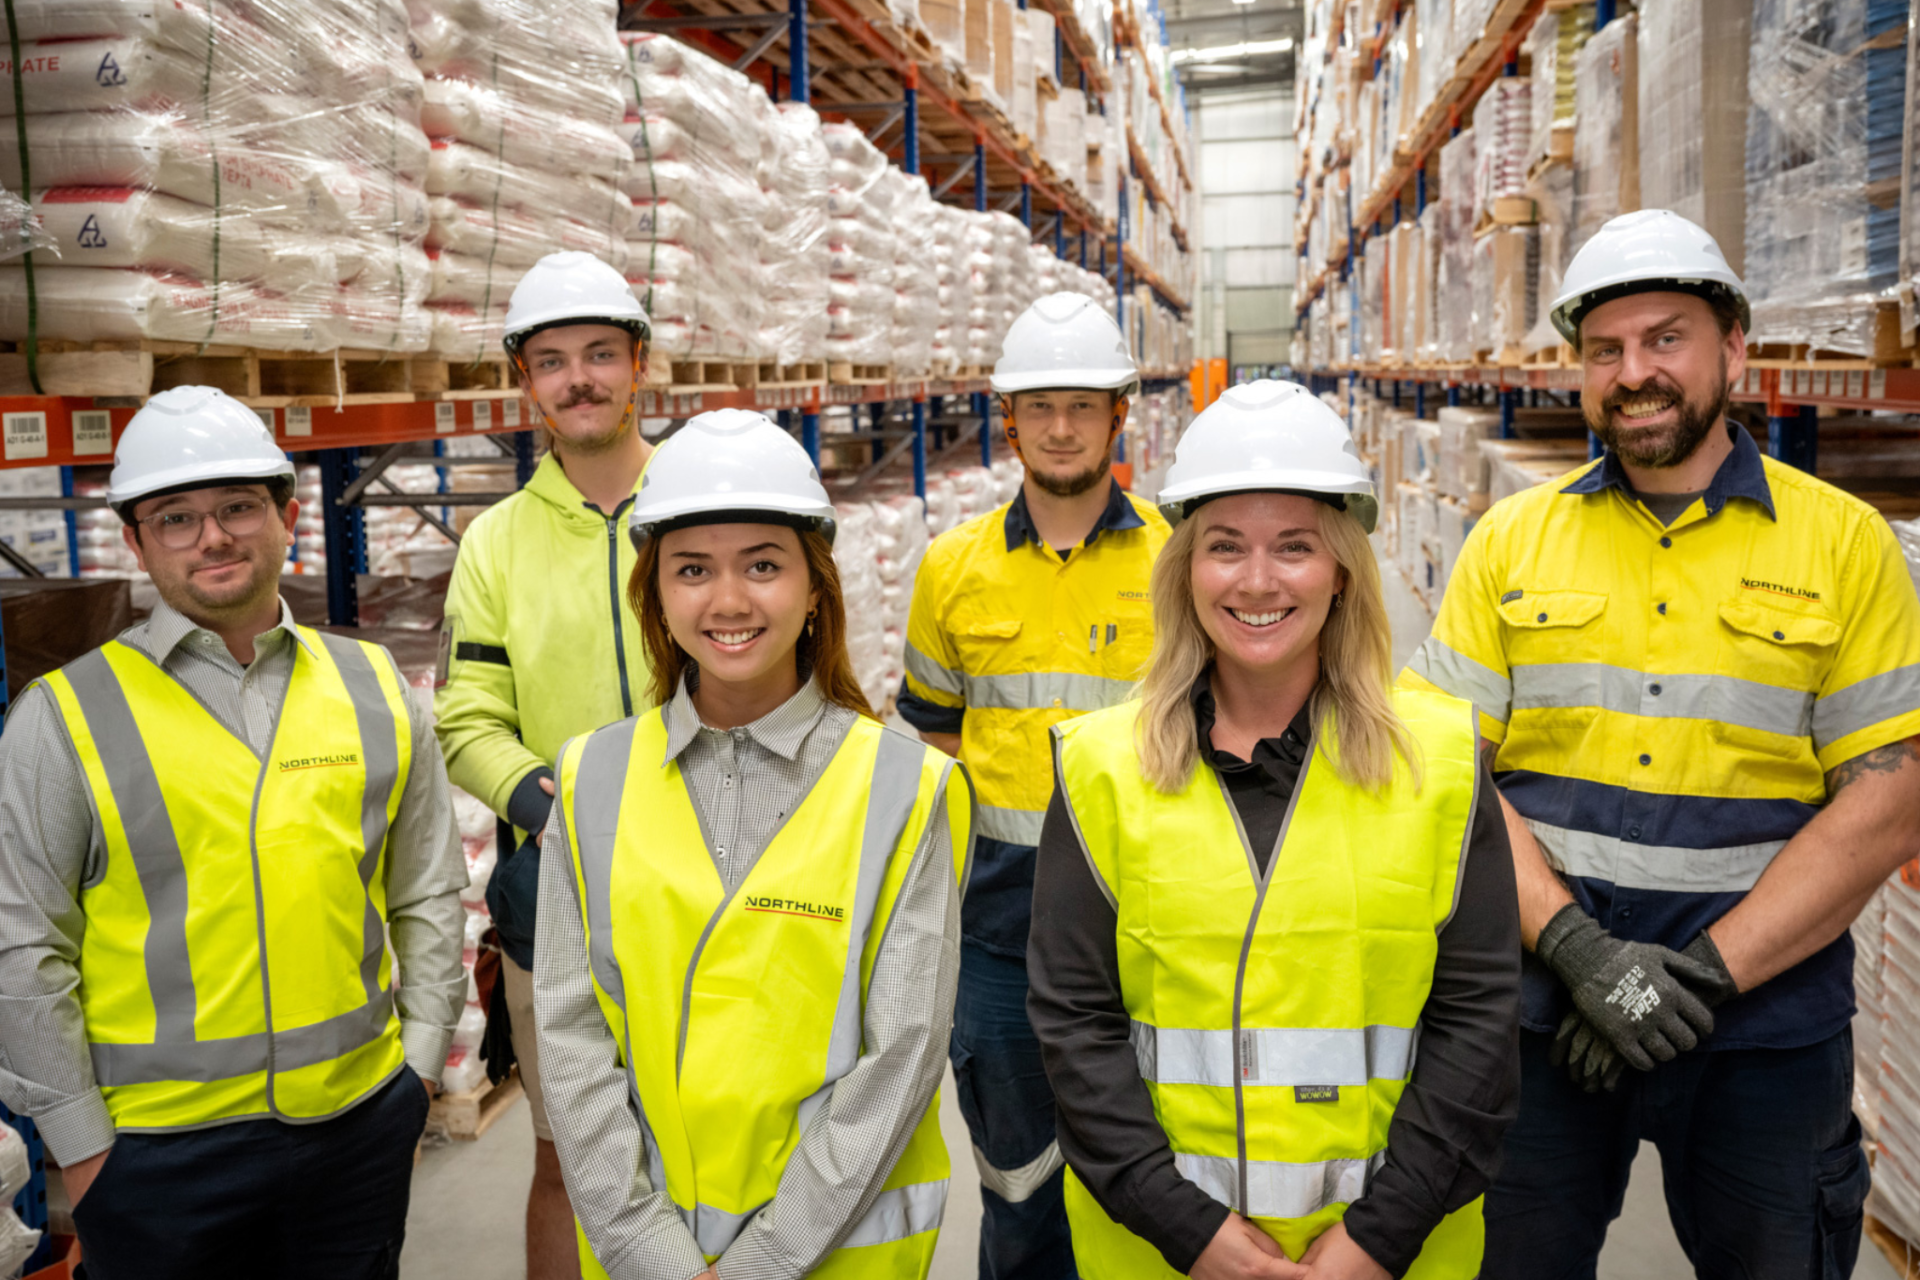 Northline employees standing in warehouse